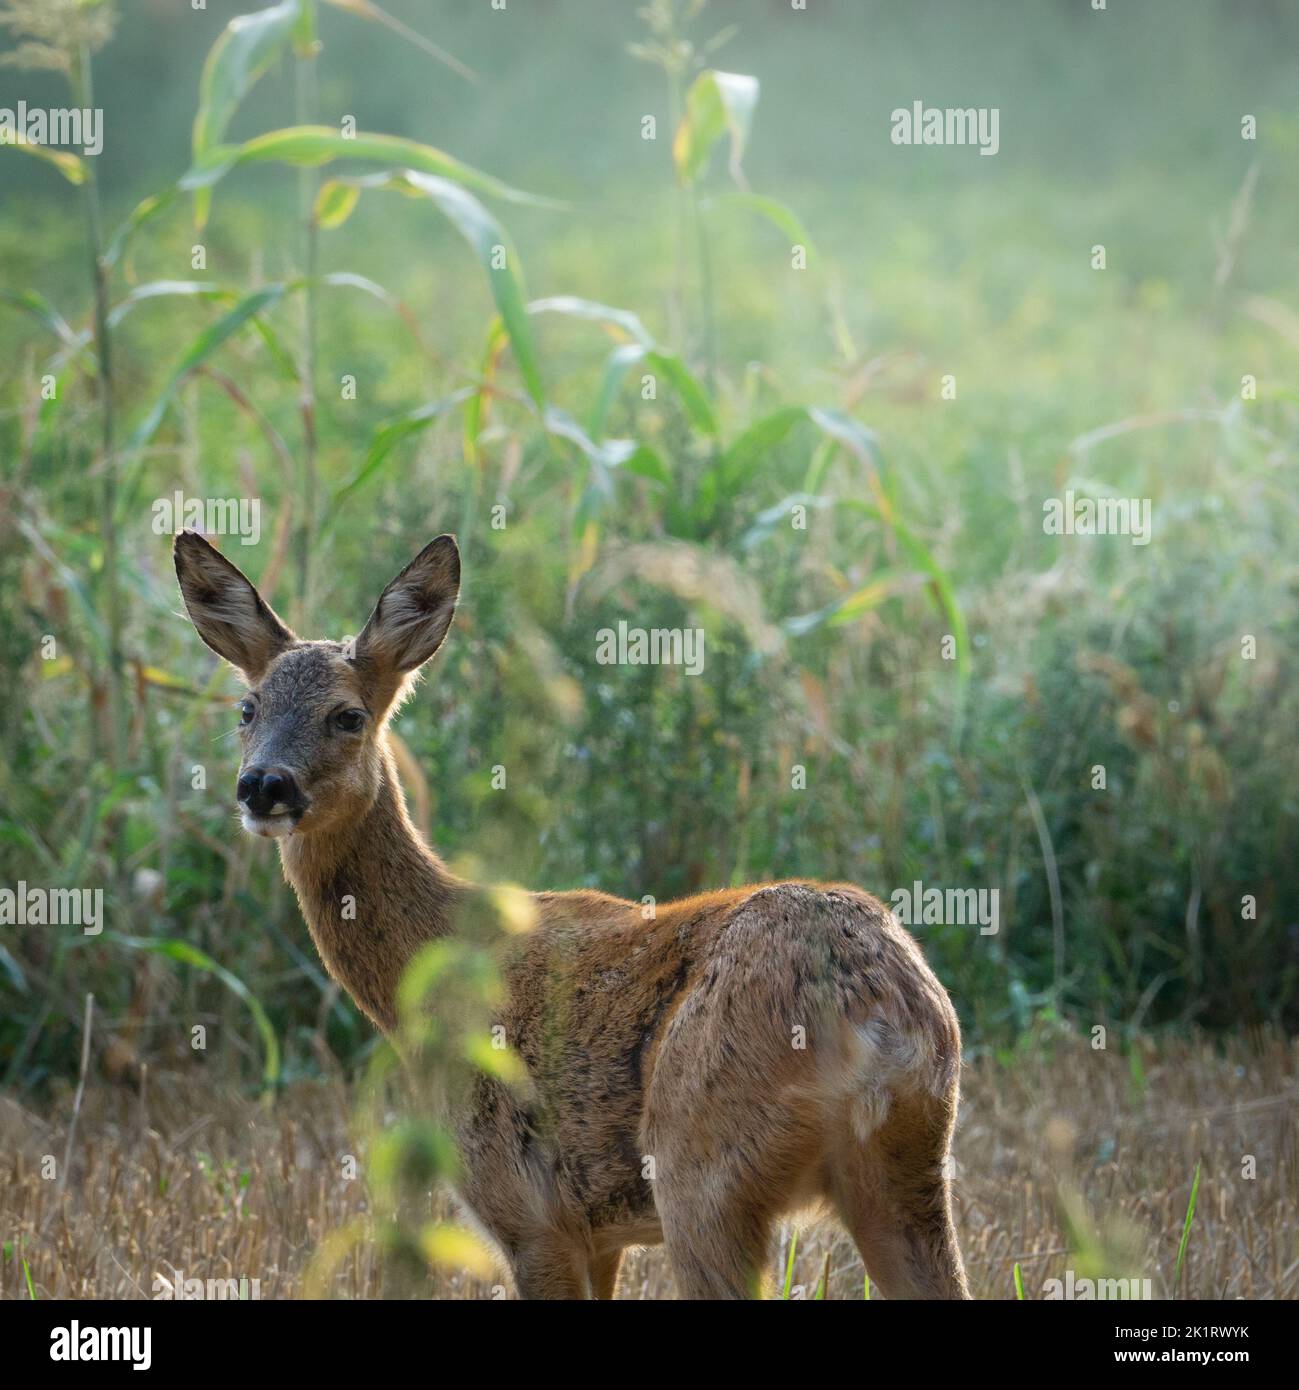 A deer stands in front of a cornfield and is illuminated by the sun. It looks into the camera Stock Photo